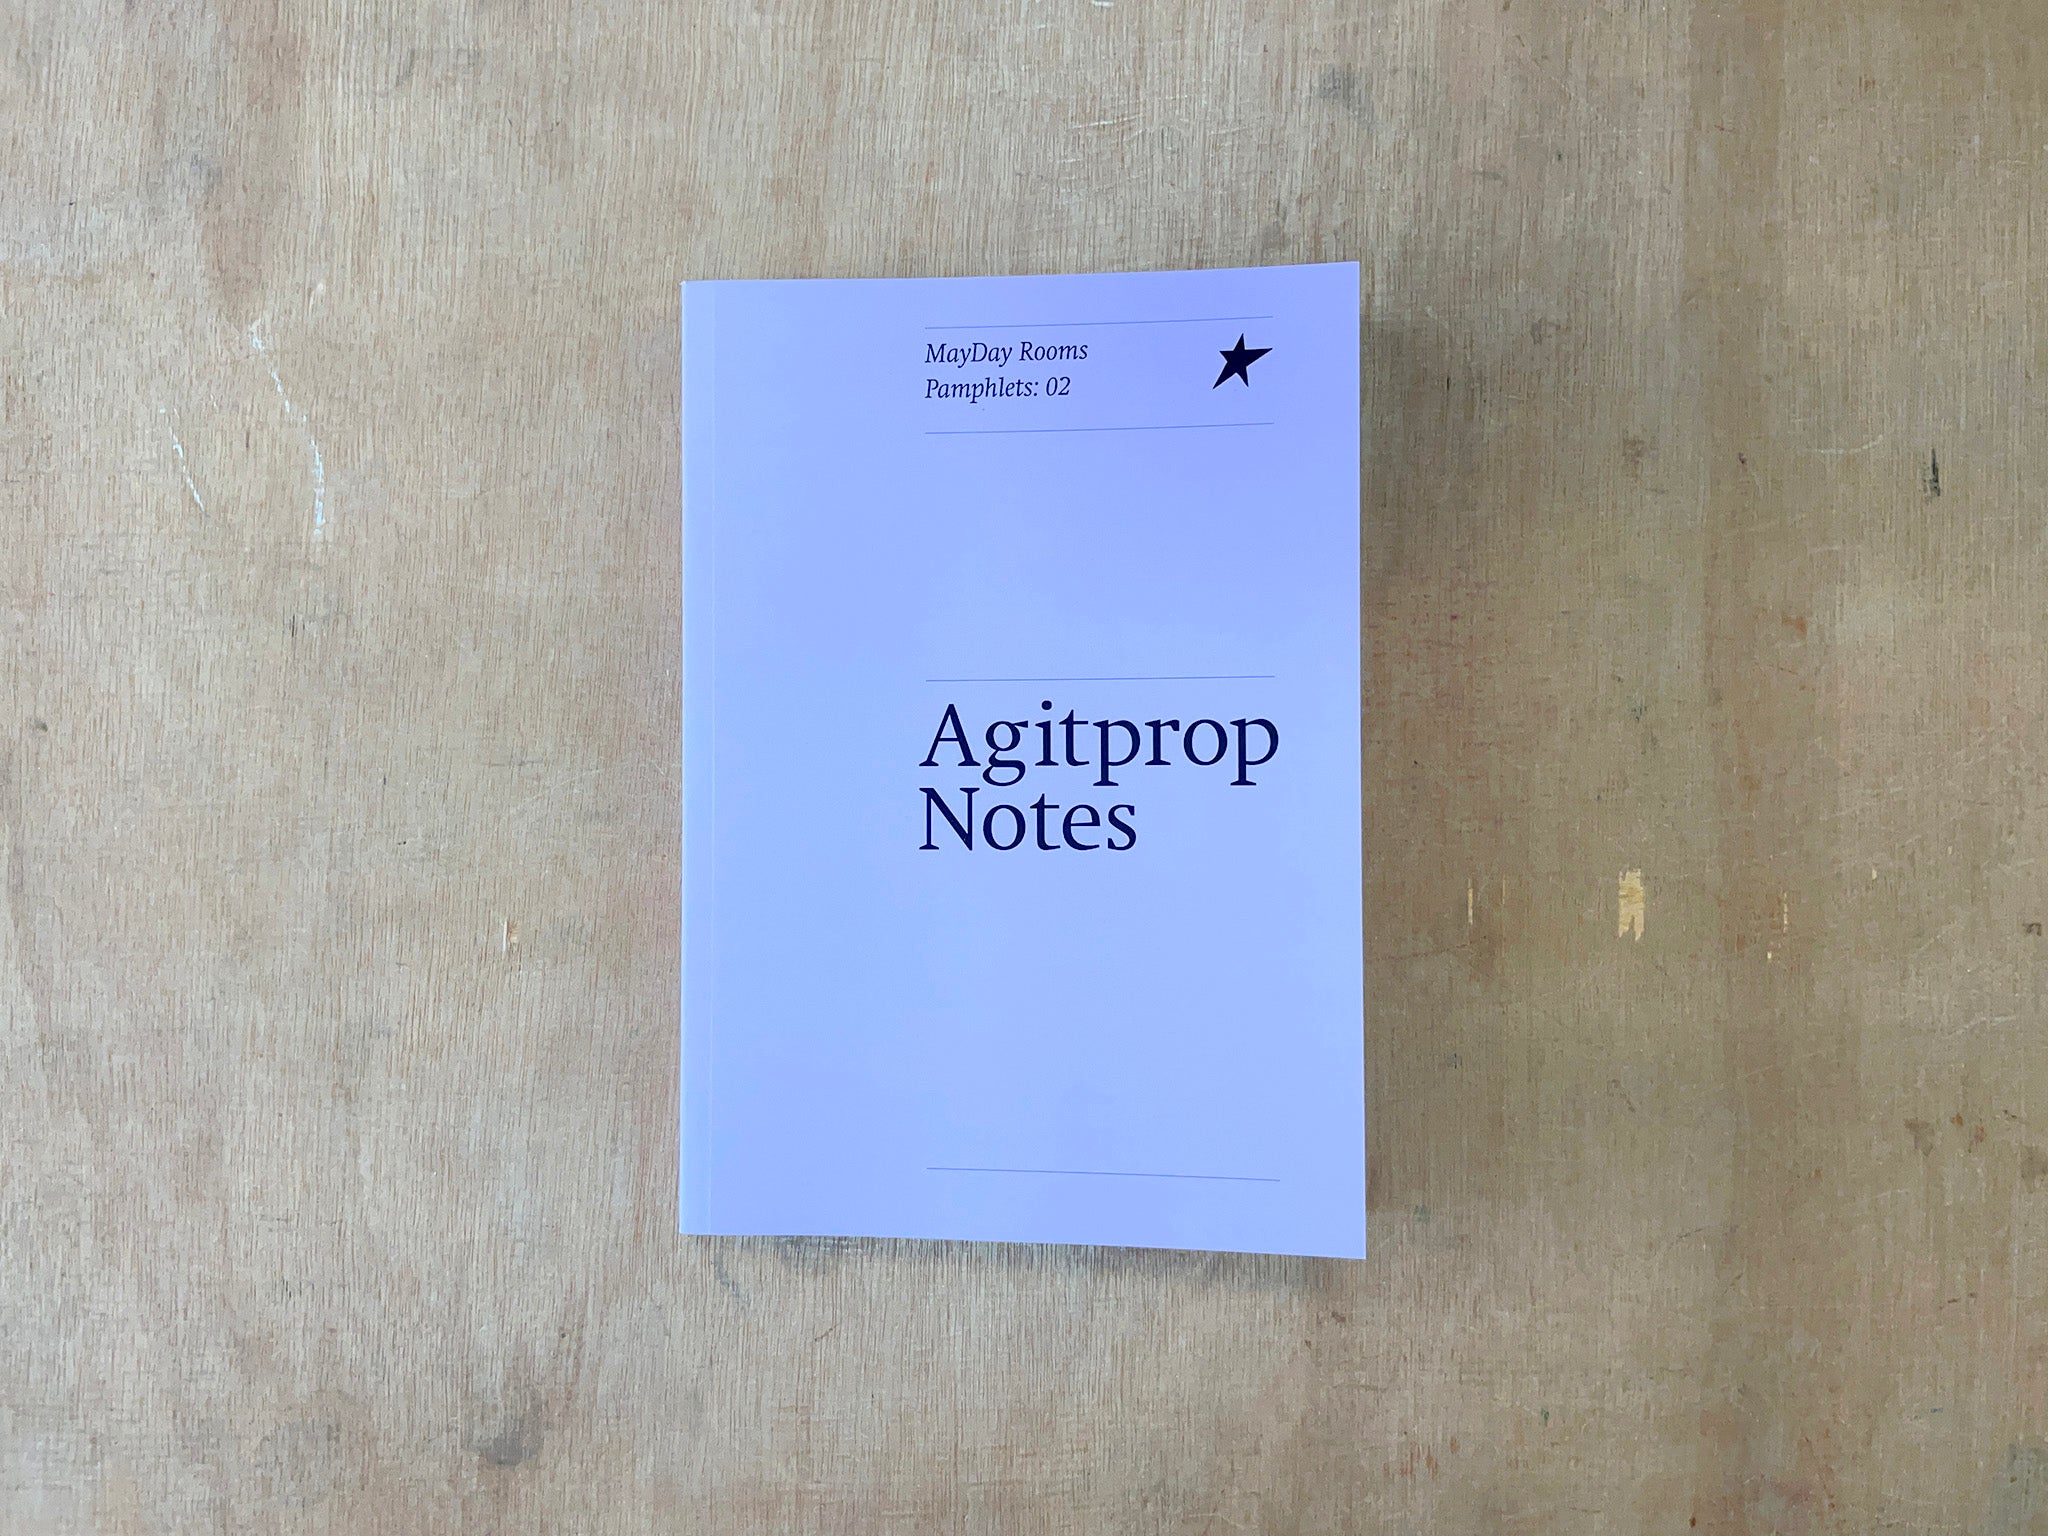 MAYDAY ROOMS PAMPHLETS: 02 - AGITPROP NOTES by Various Artists